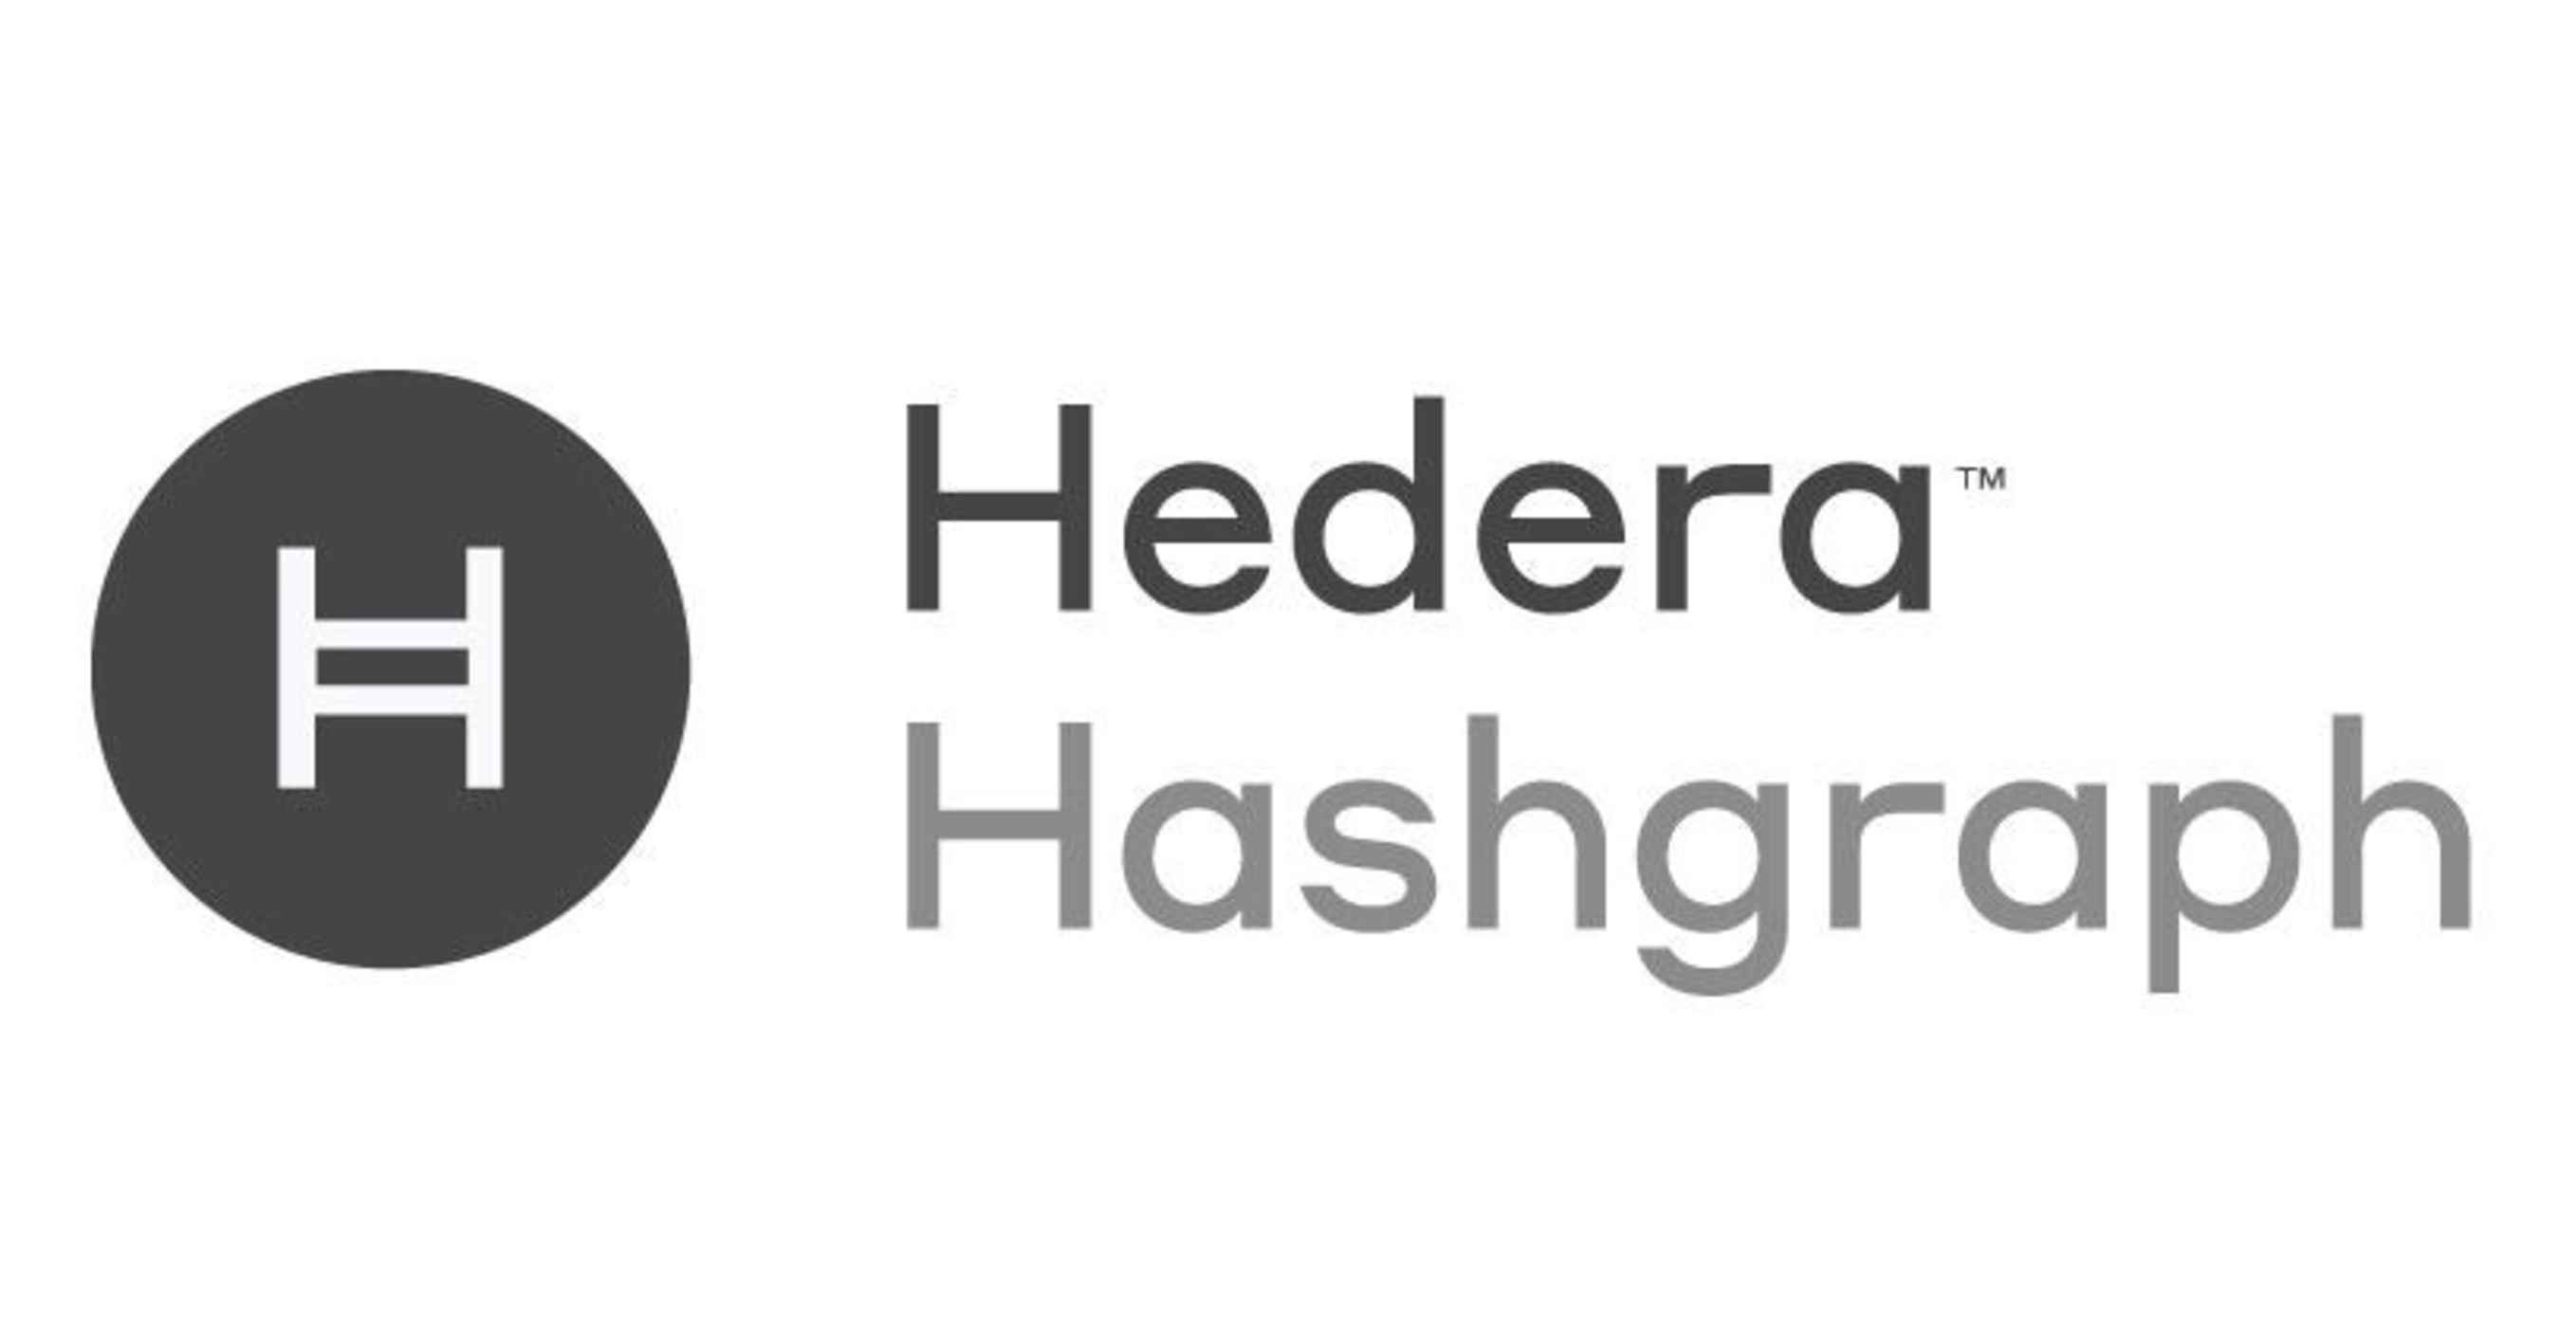 Hedera Hashgraph A Fast and Secure Distributed Ledger Technology